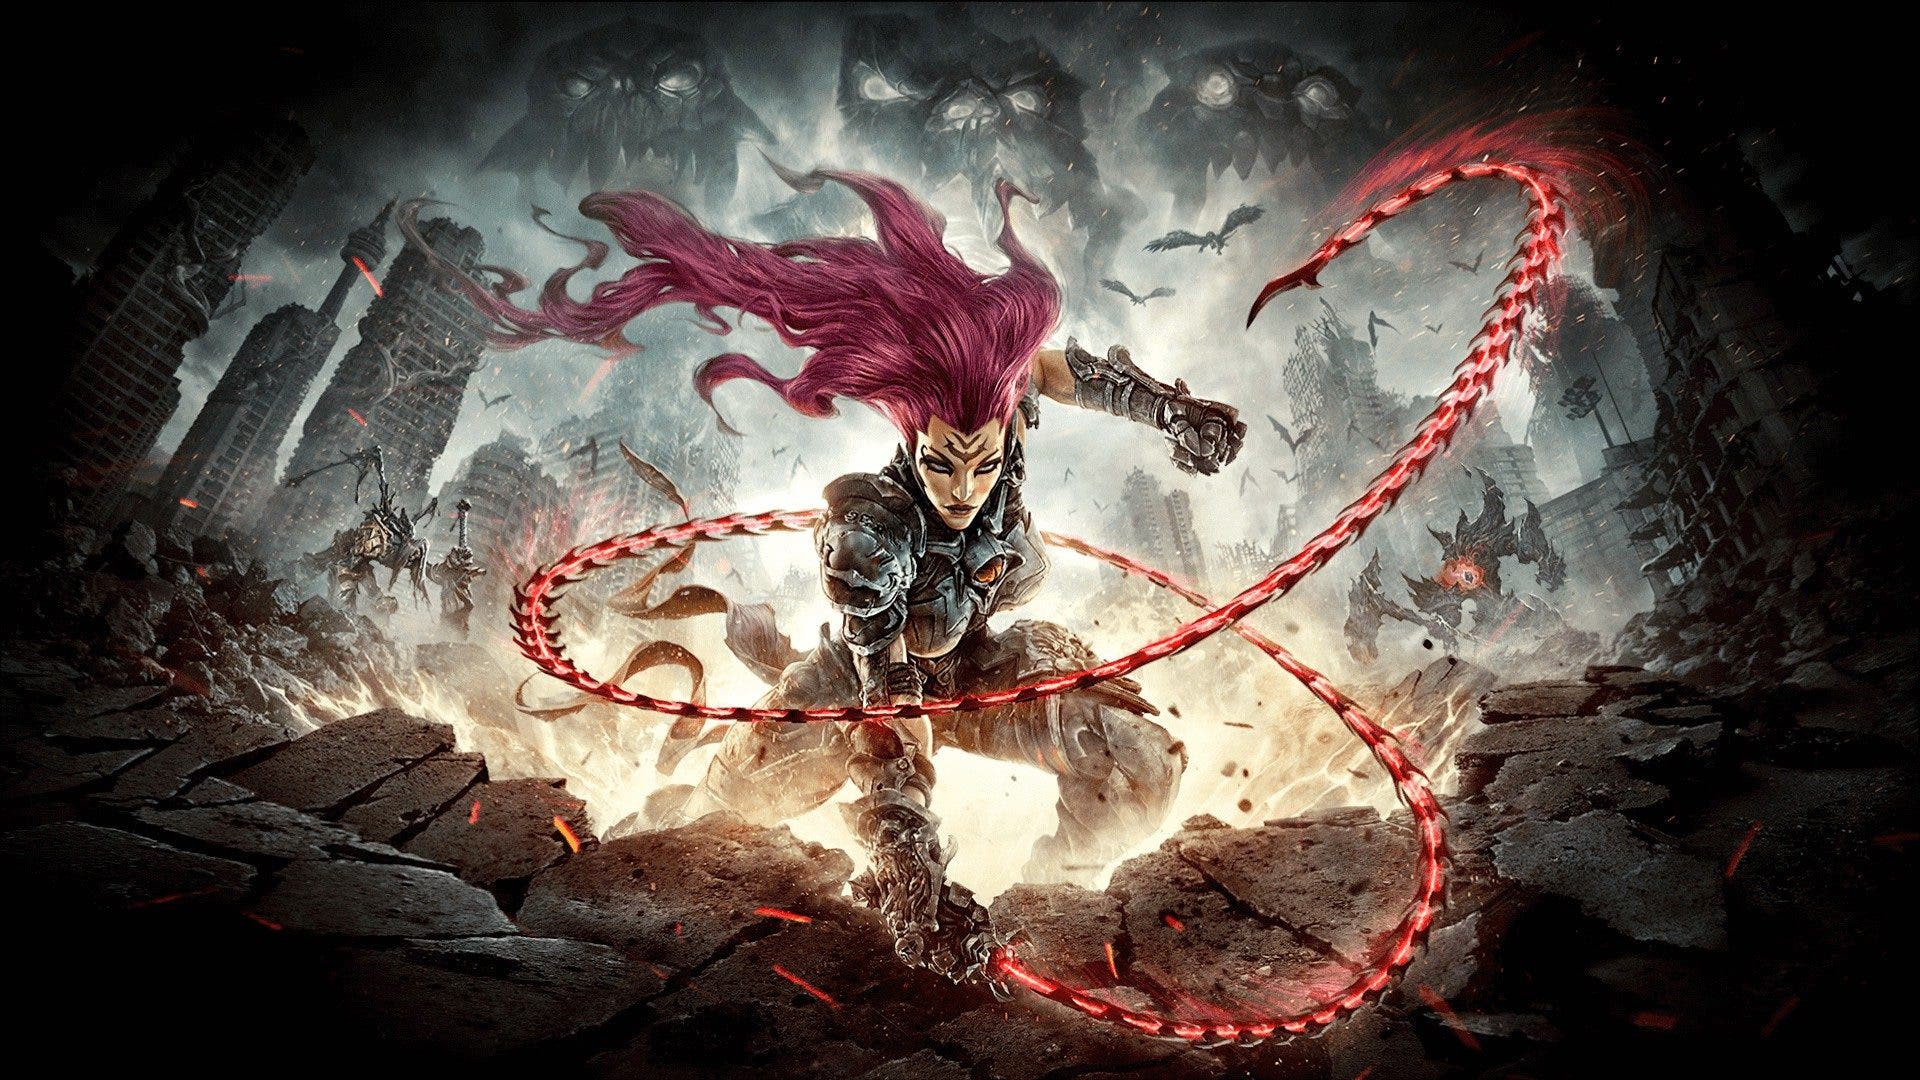 Darksiders launches temporary sales for these games available in the Nintendo Switch eShop